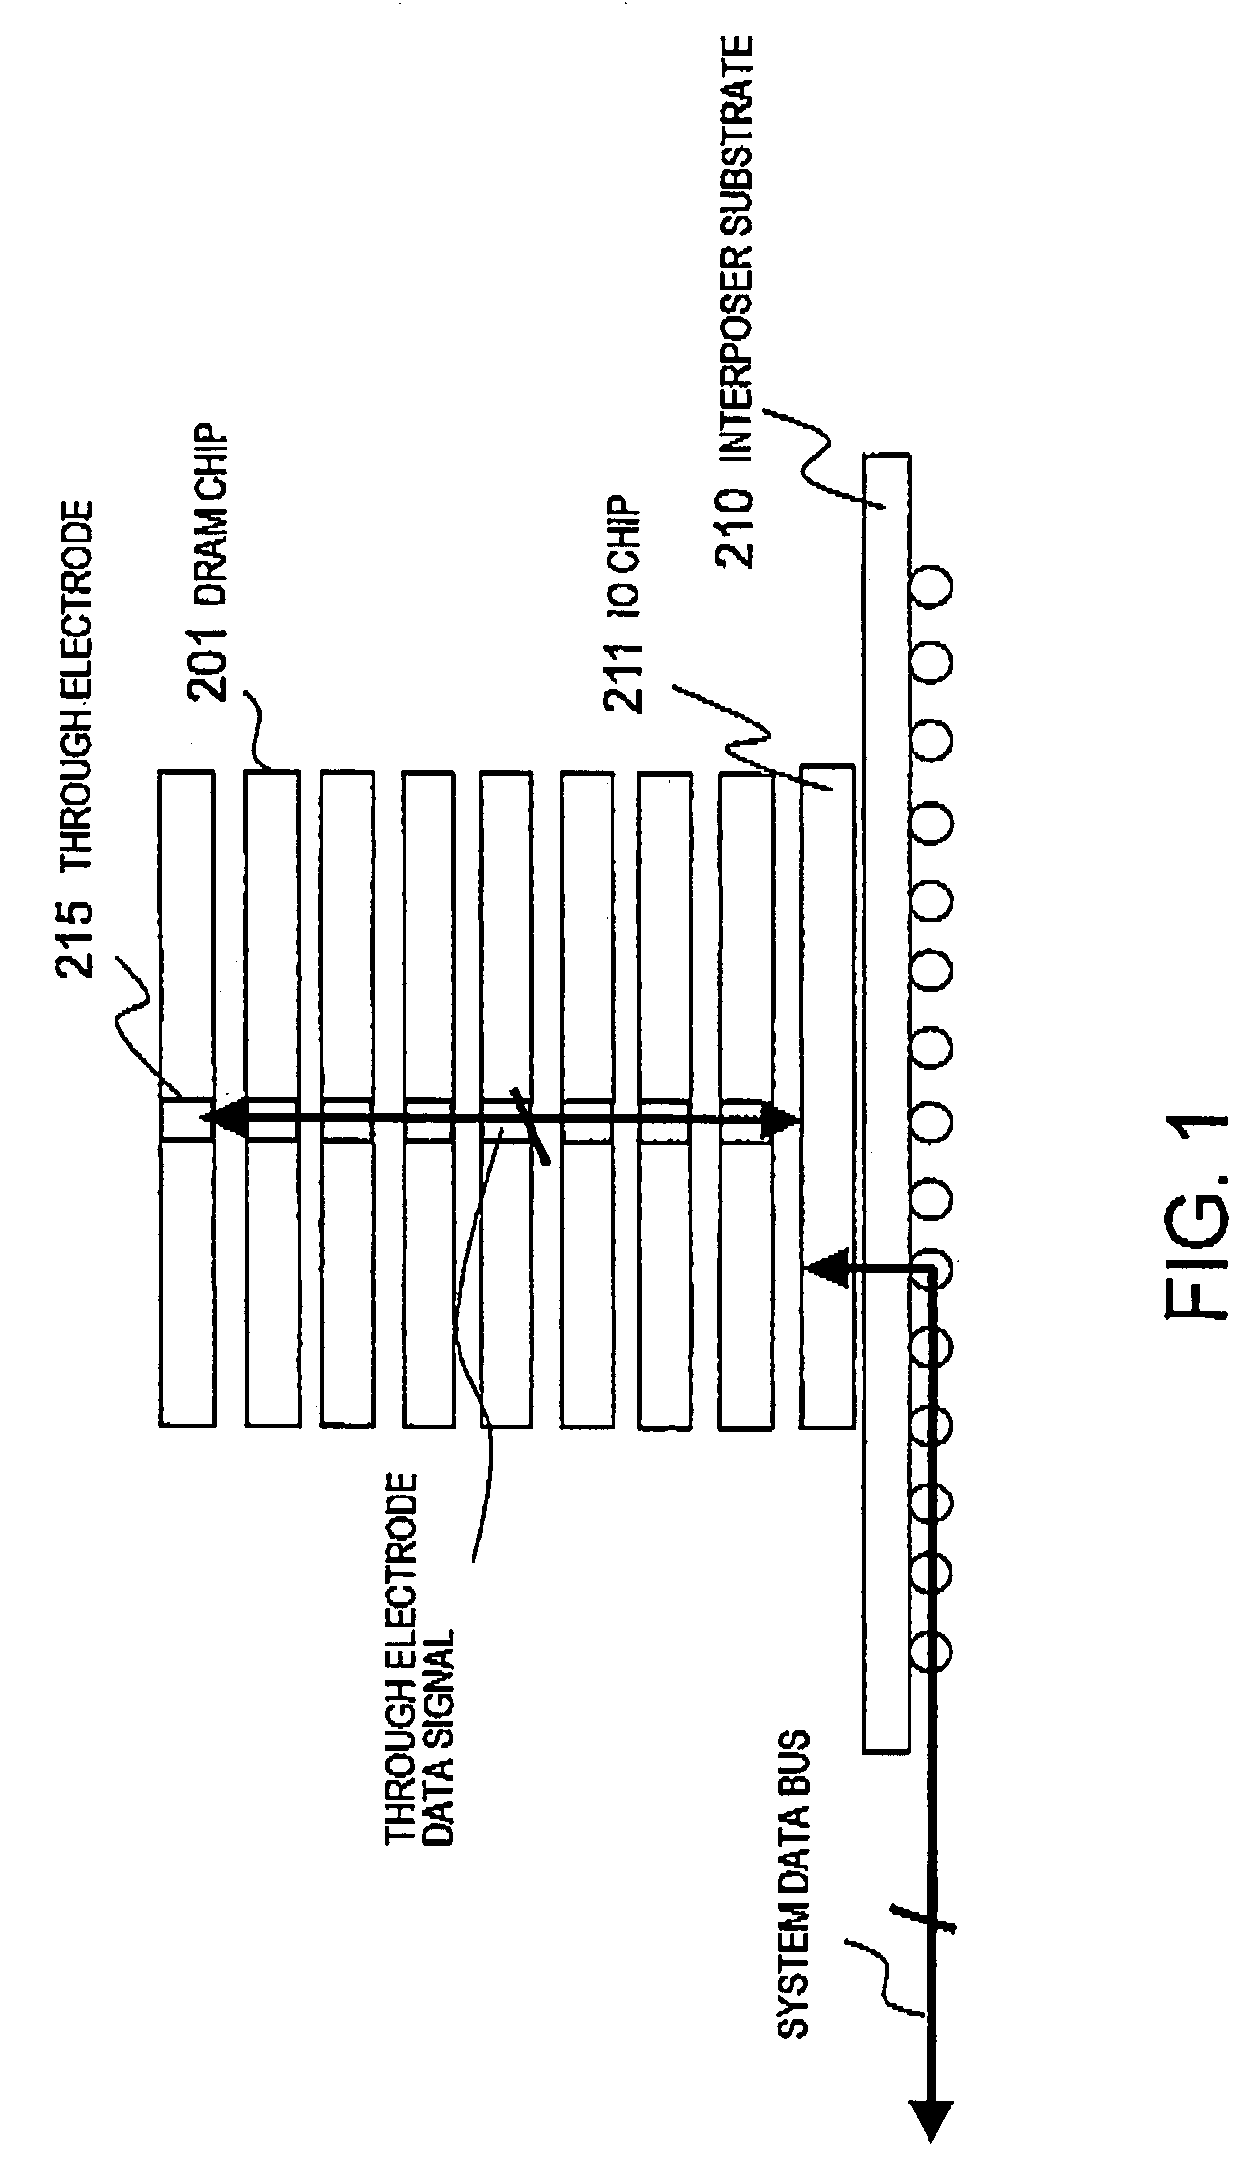 Memory module and memory system